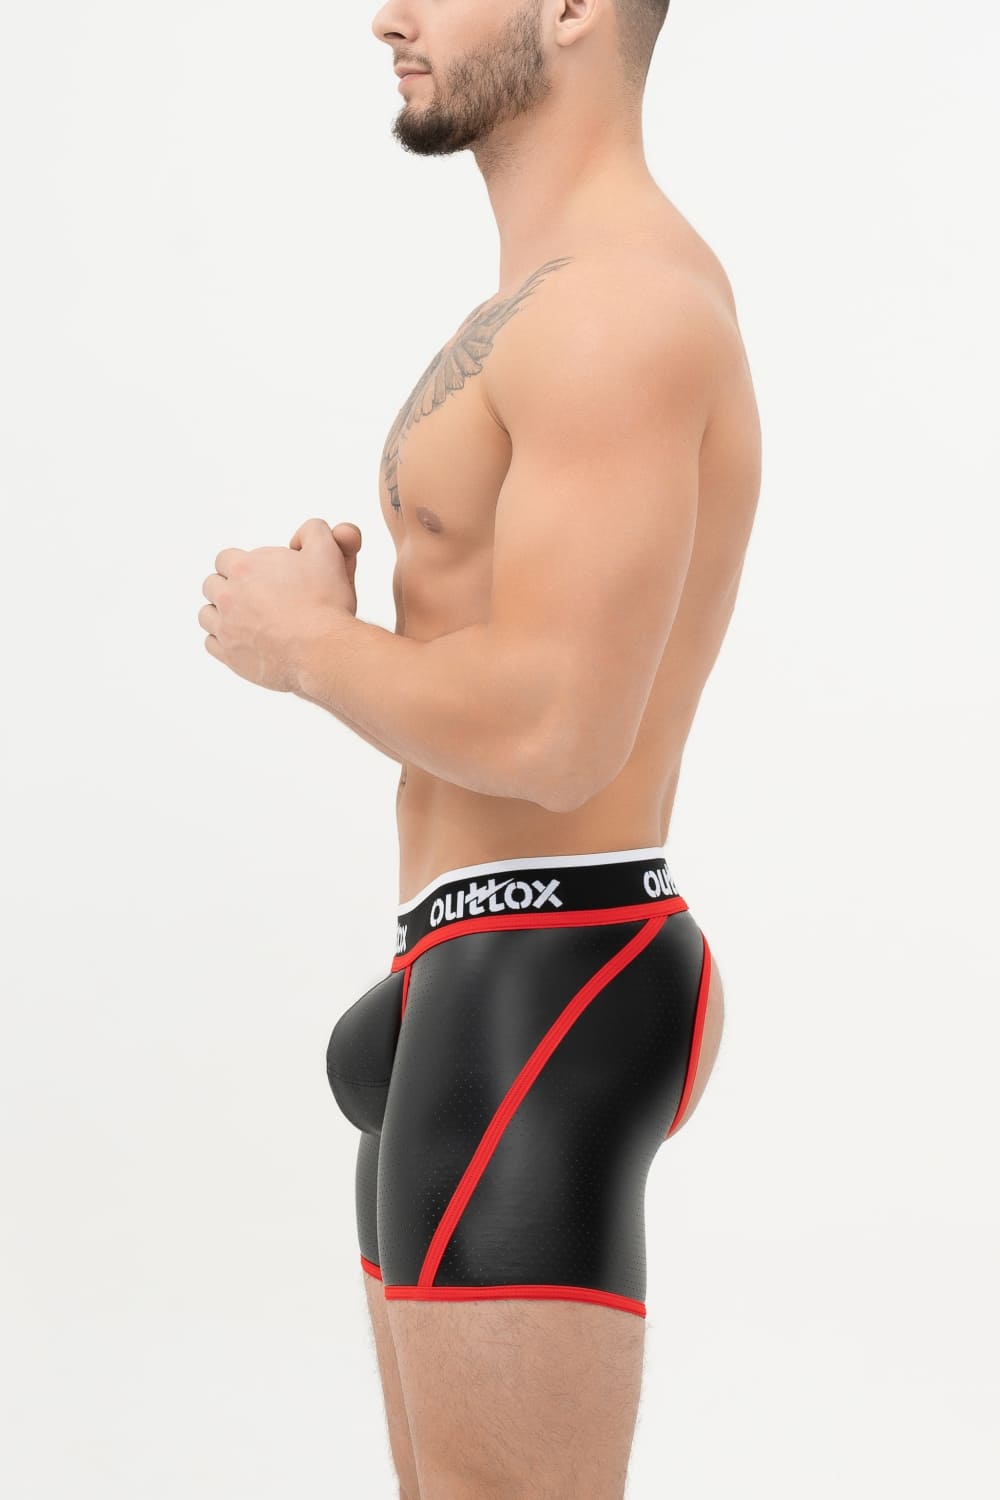 Outtox. Open Rear Shorts with Snap Codpiece. Black+Red